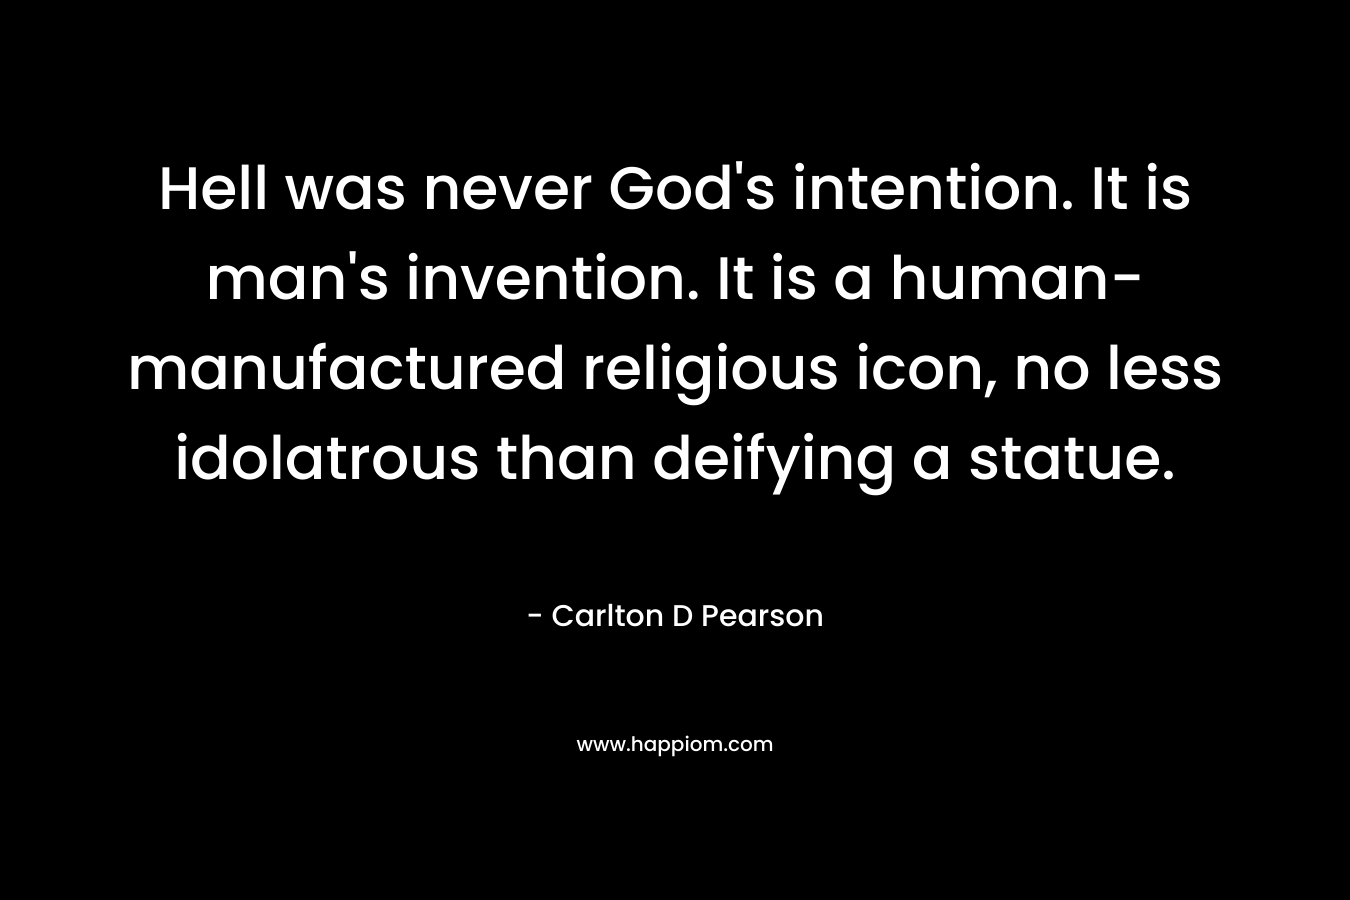 Hell was never God's intention. It is man's invention. It is a human-manufactured religious icon, no less idolatrous than deifying a statue.